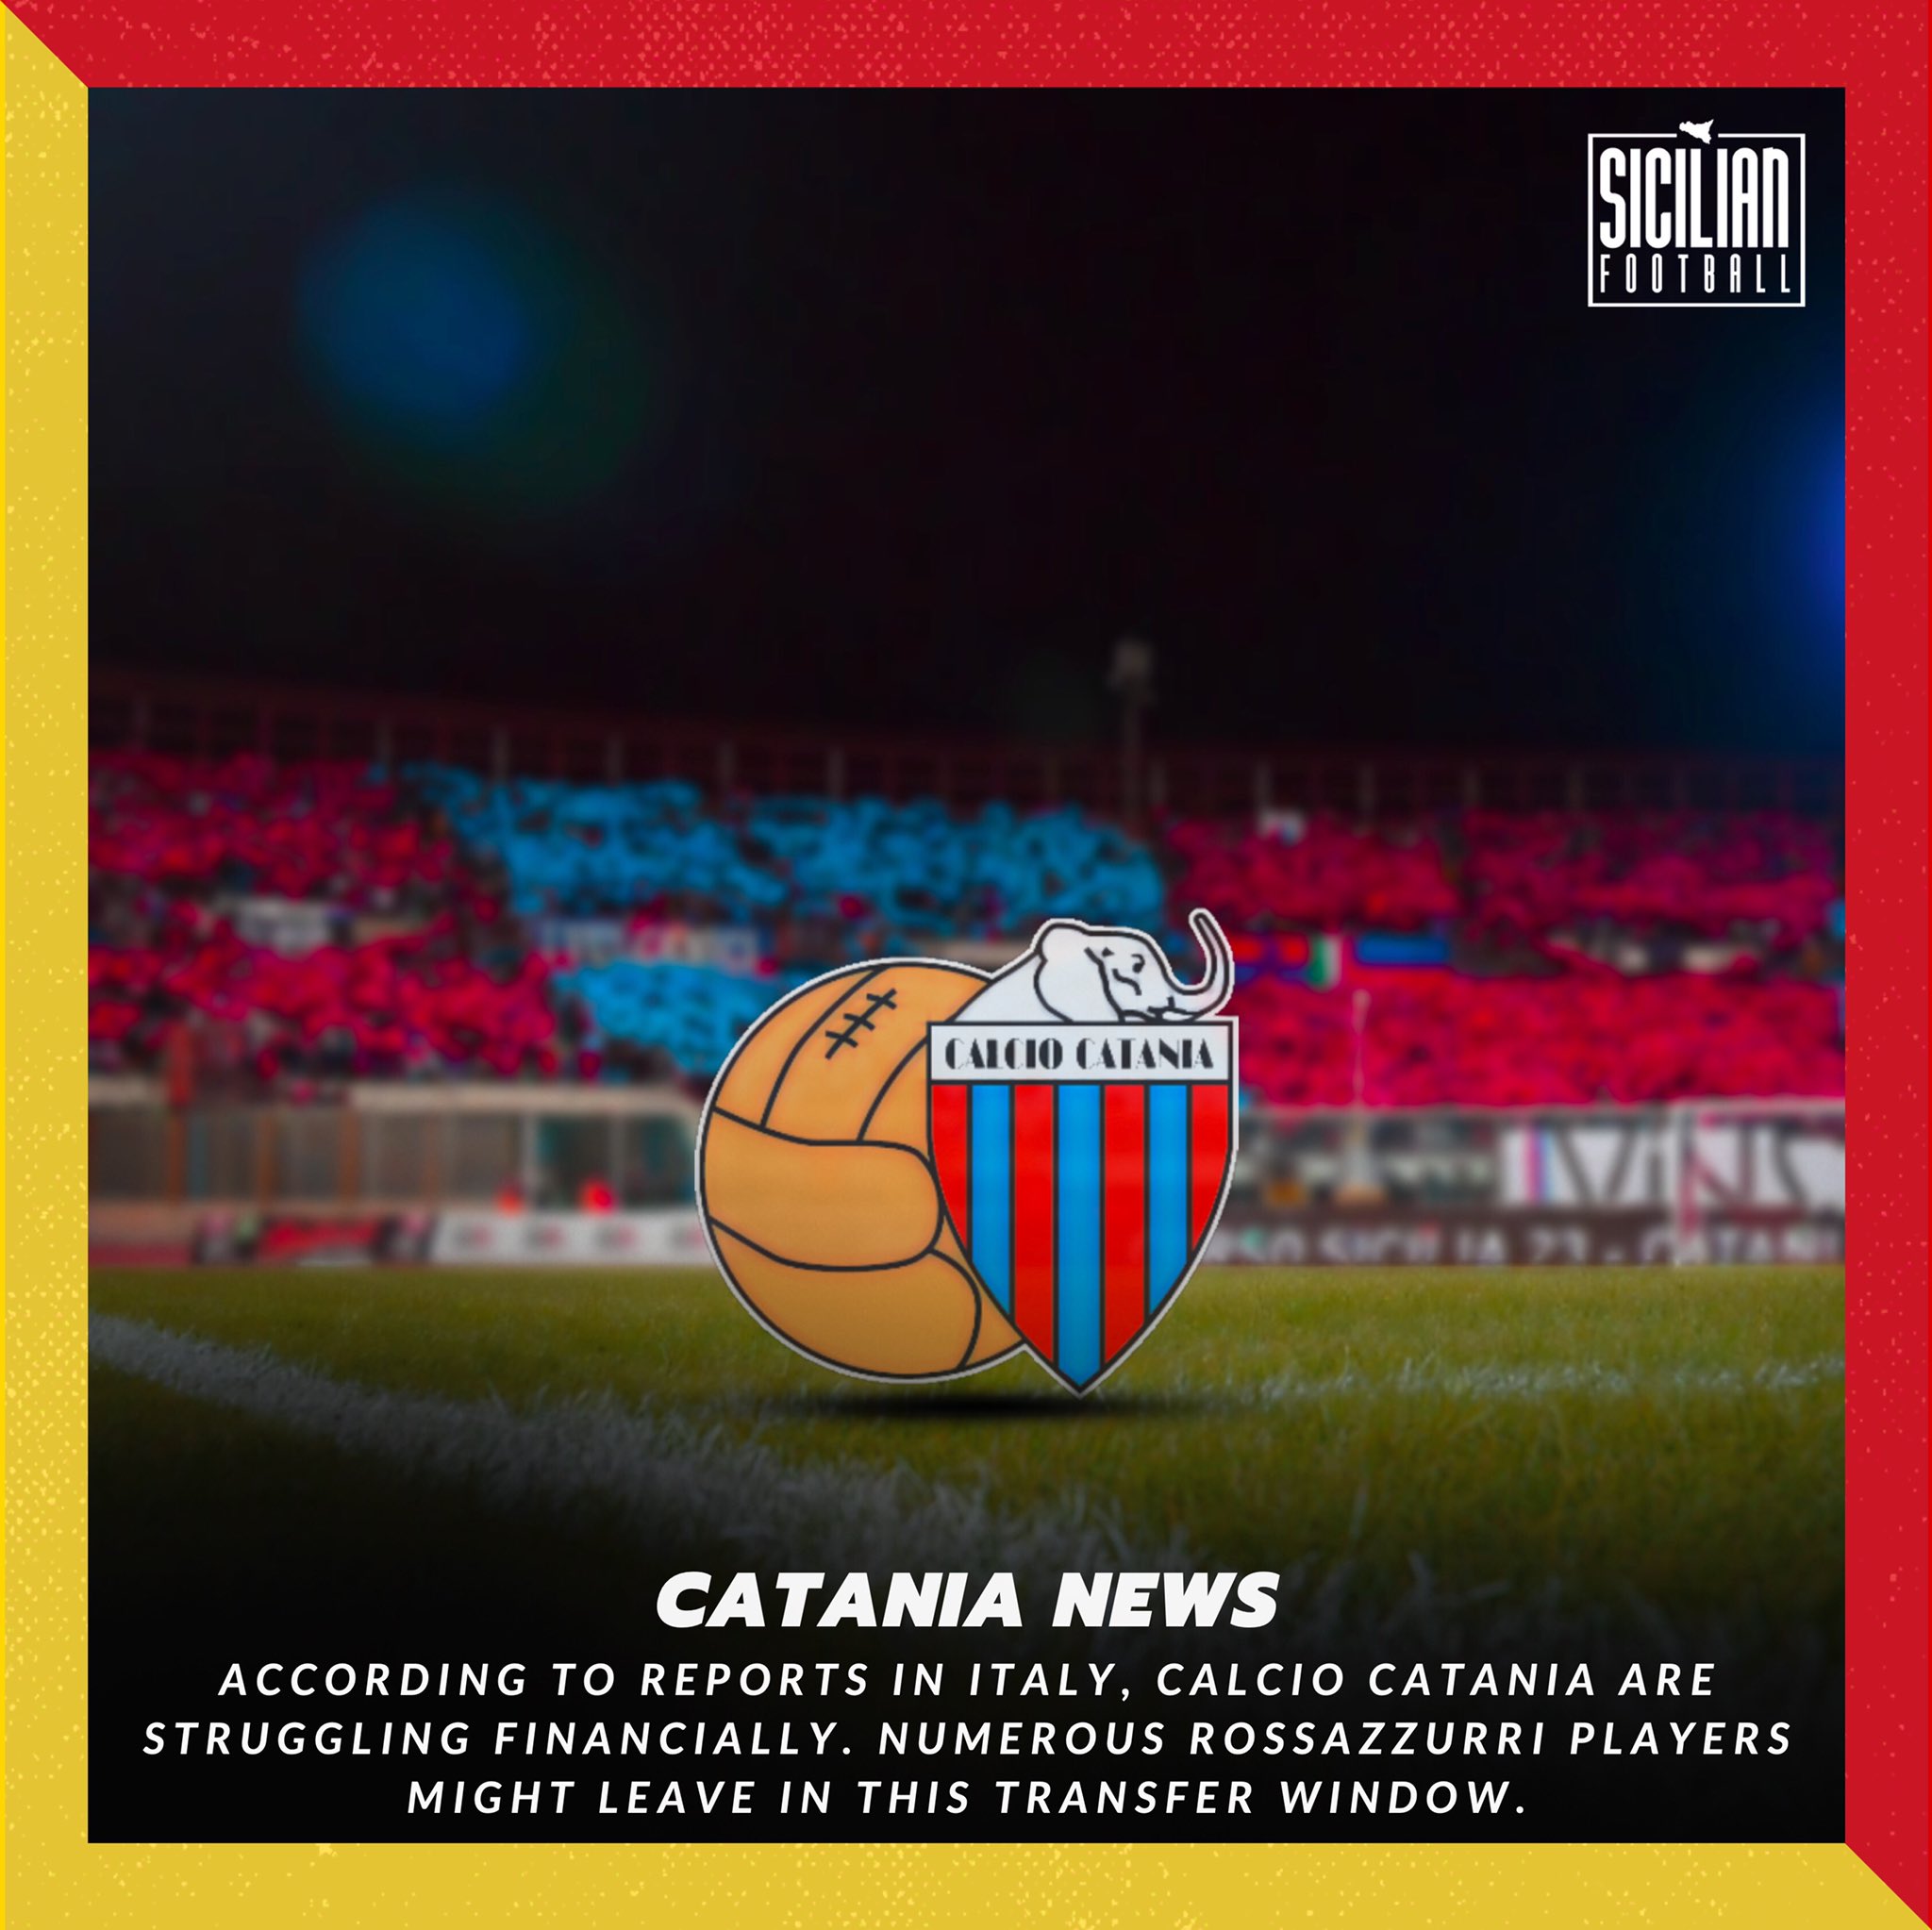 Sicilian Football on X: With bankruptcy procedures underway at